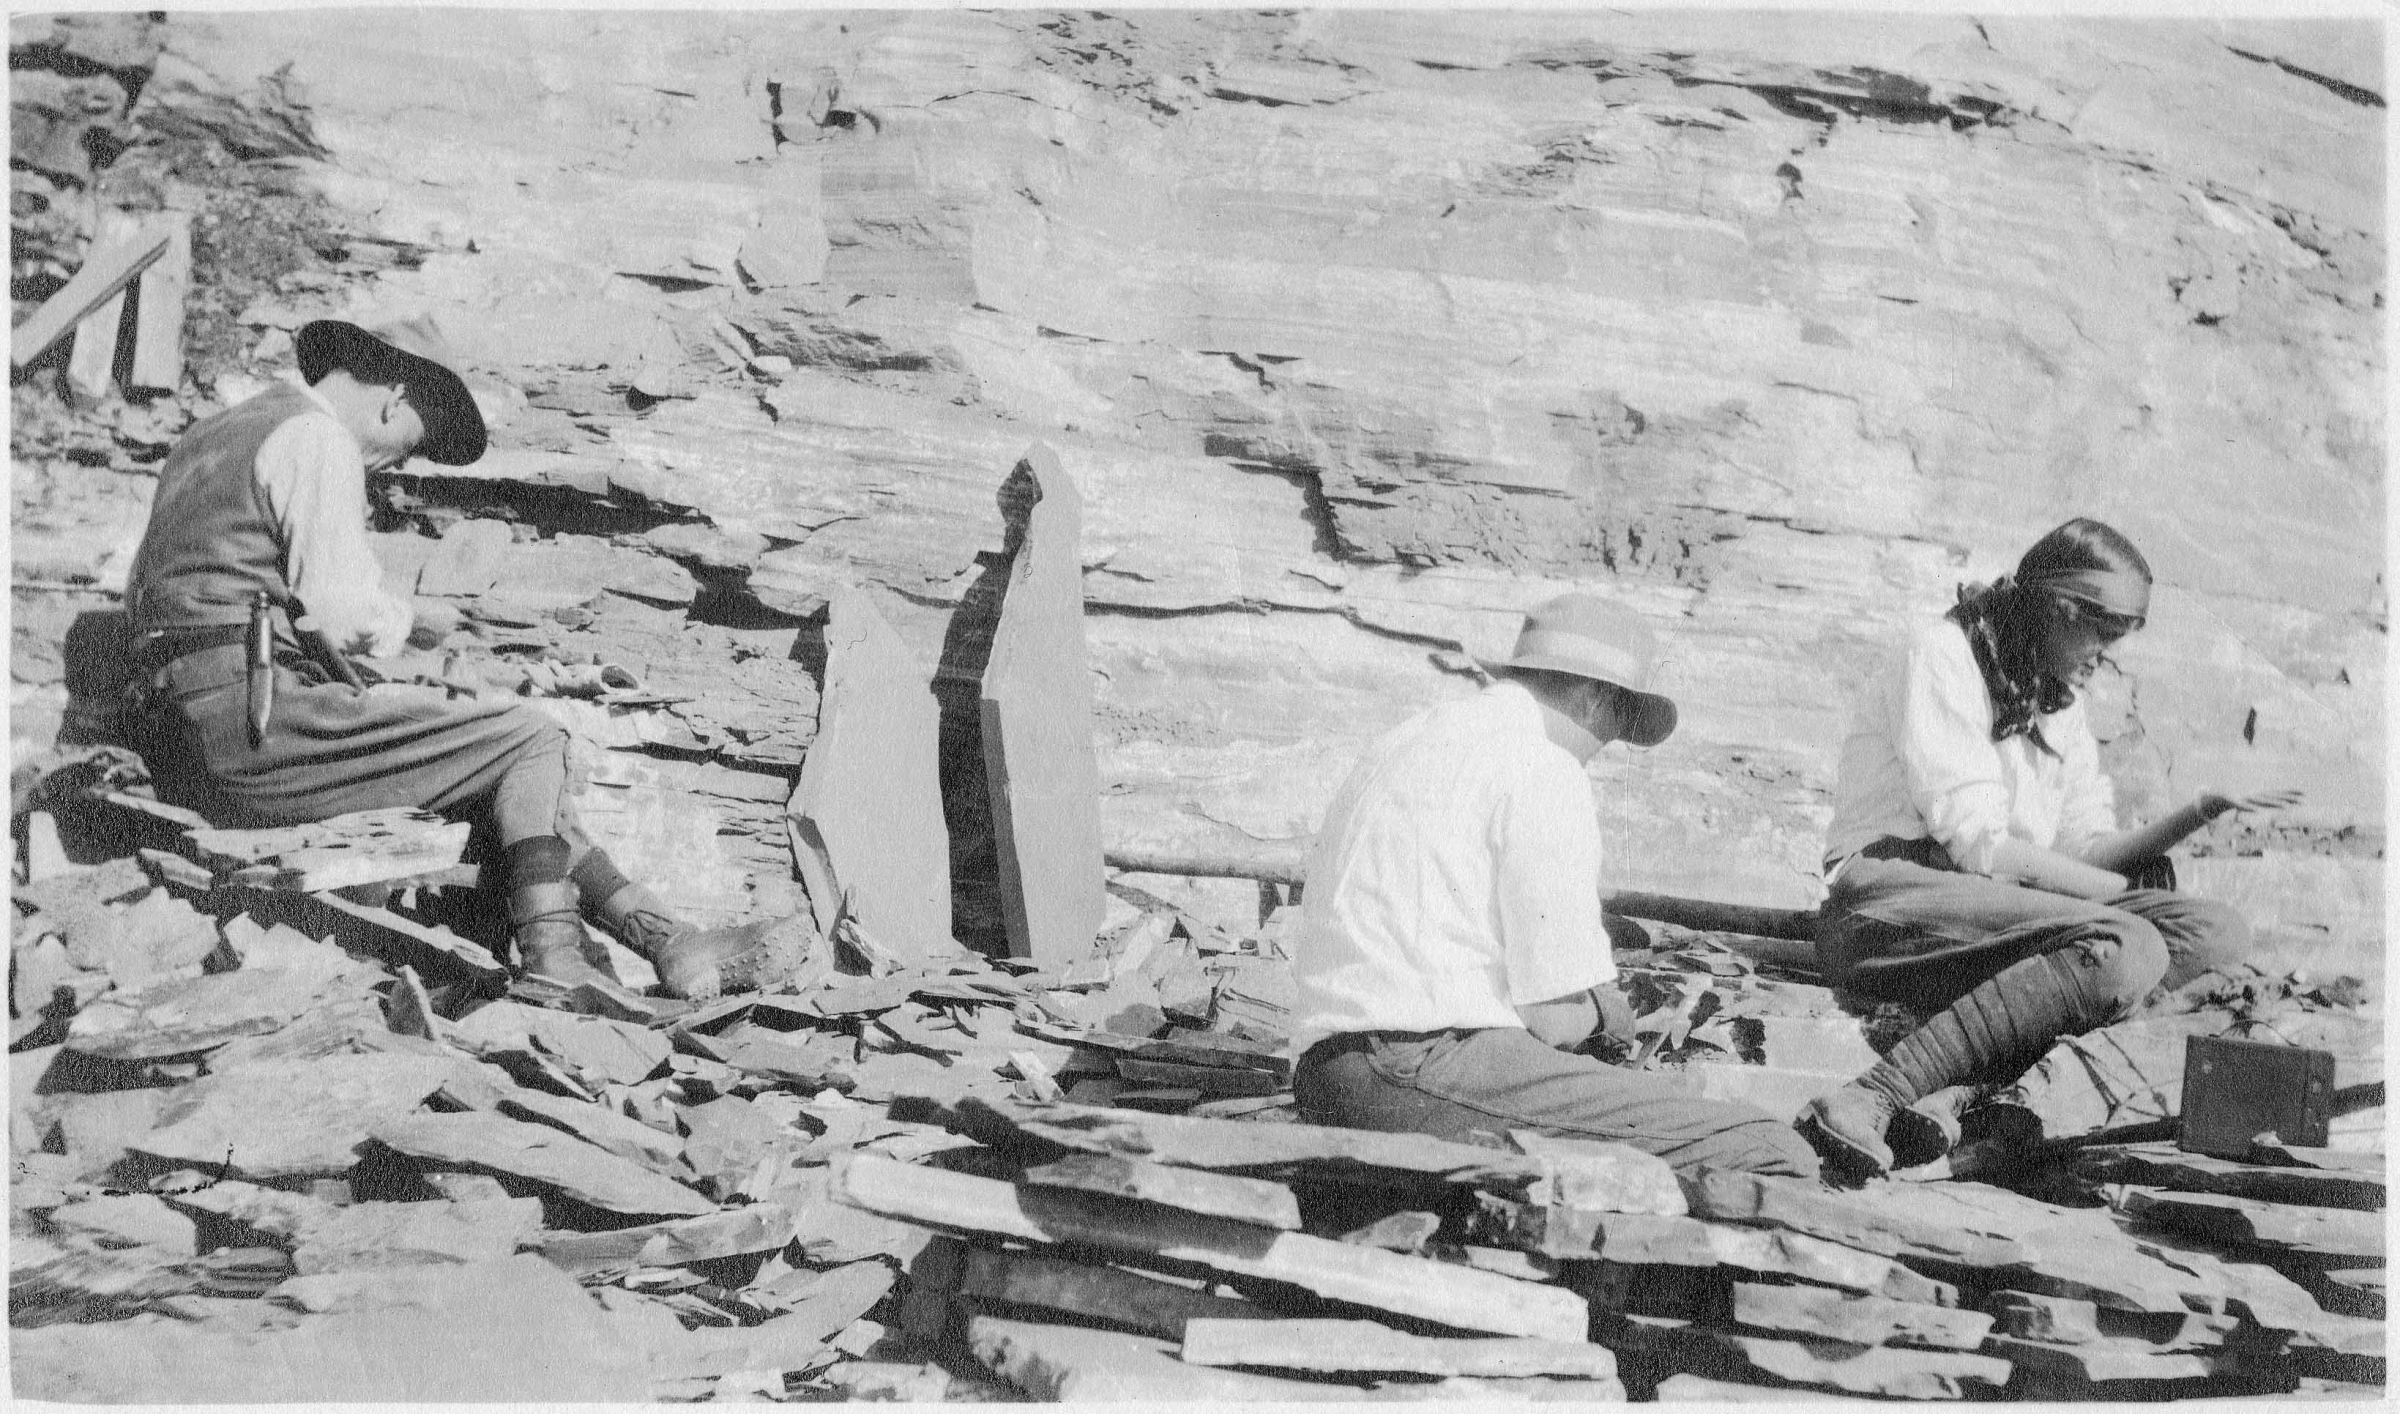 Fourth Secretary of the Smithsonian, Charles Doolittle Walcott, excavates part of the Burgess Shale in Canada with his daughter and son in 1913. (Smithsonian Institution photo) 